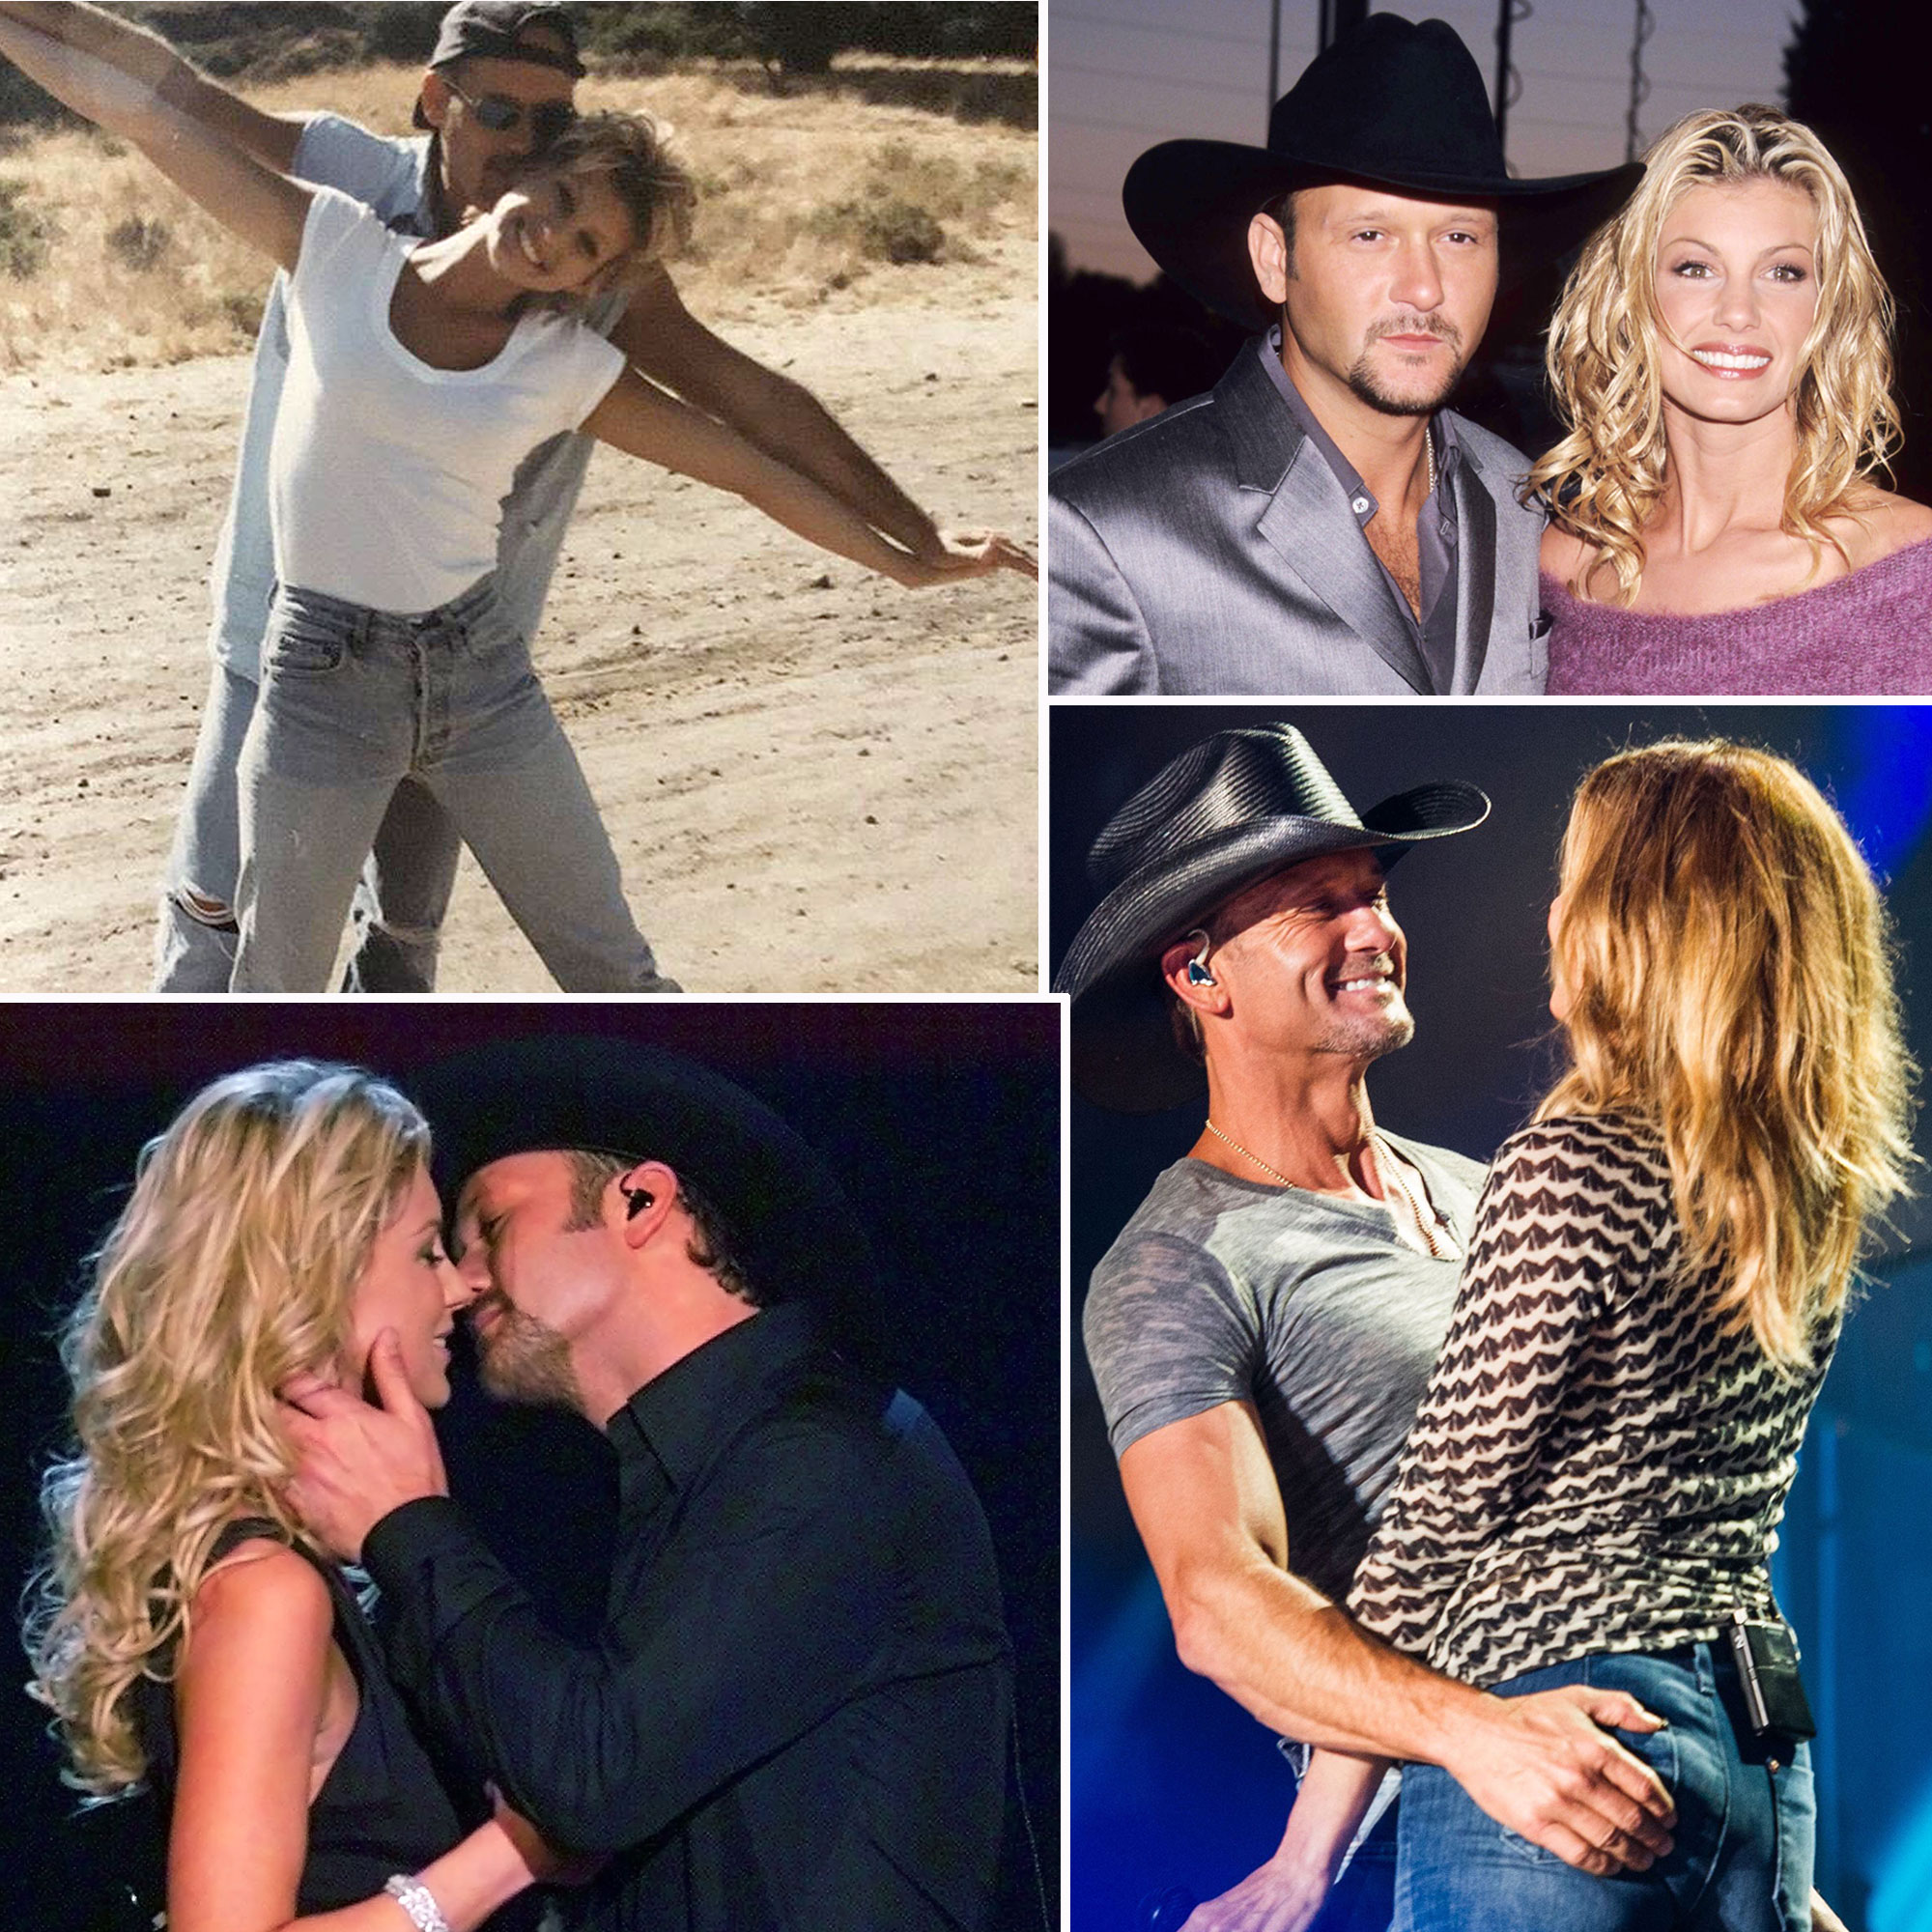 It's Your Love Tim McGraw and Faith Hill lyric video 